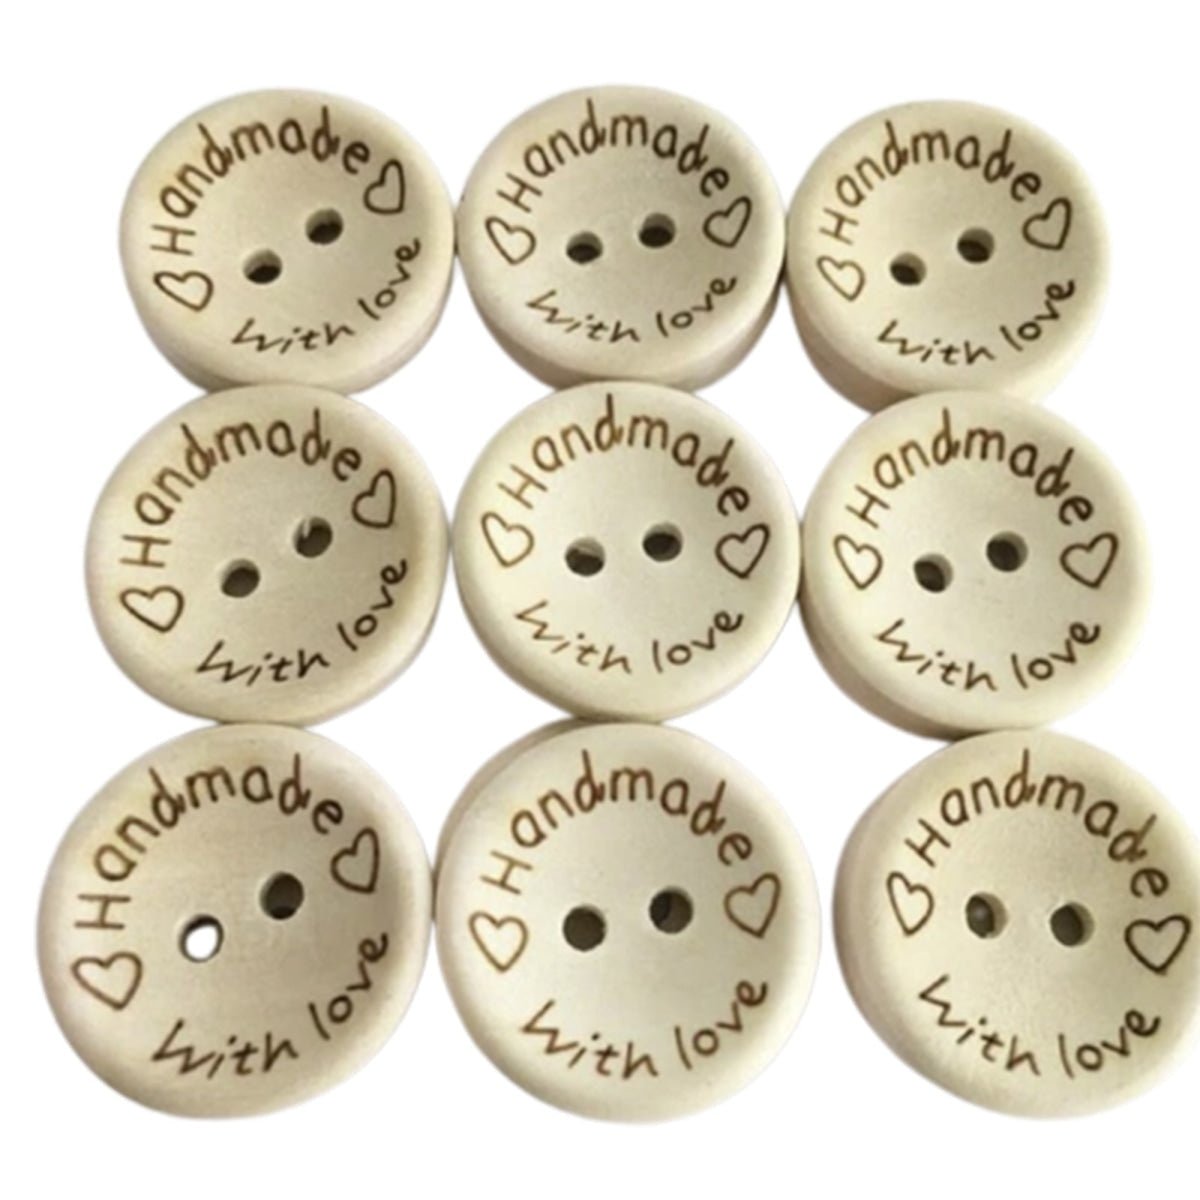 100x 15mm "Handmade with Love" Round Wooden Buttons Handmade Clothes - Asia Sell